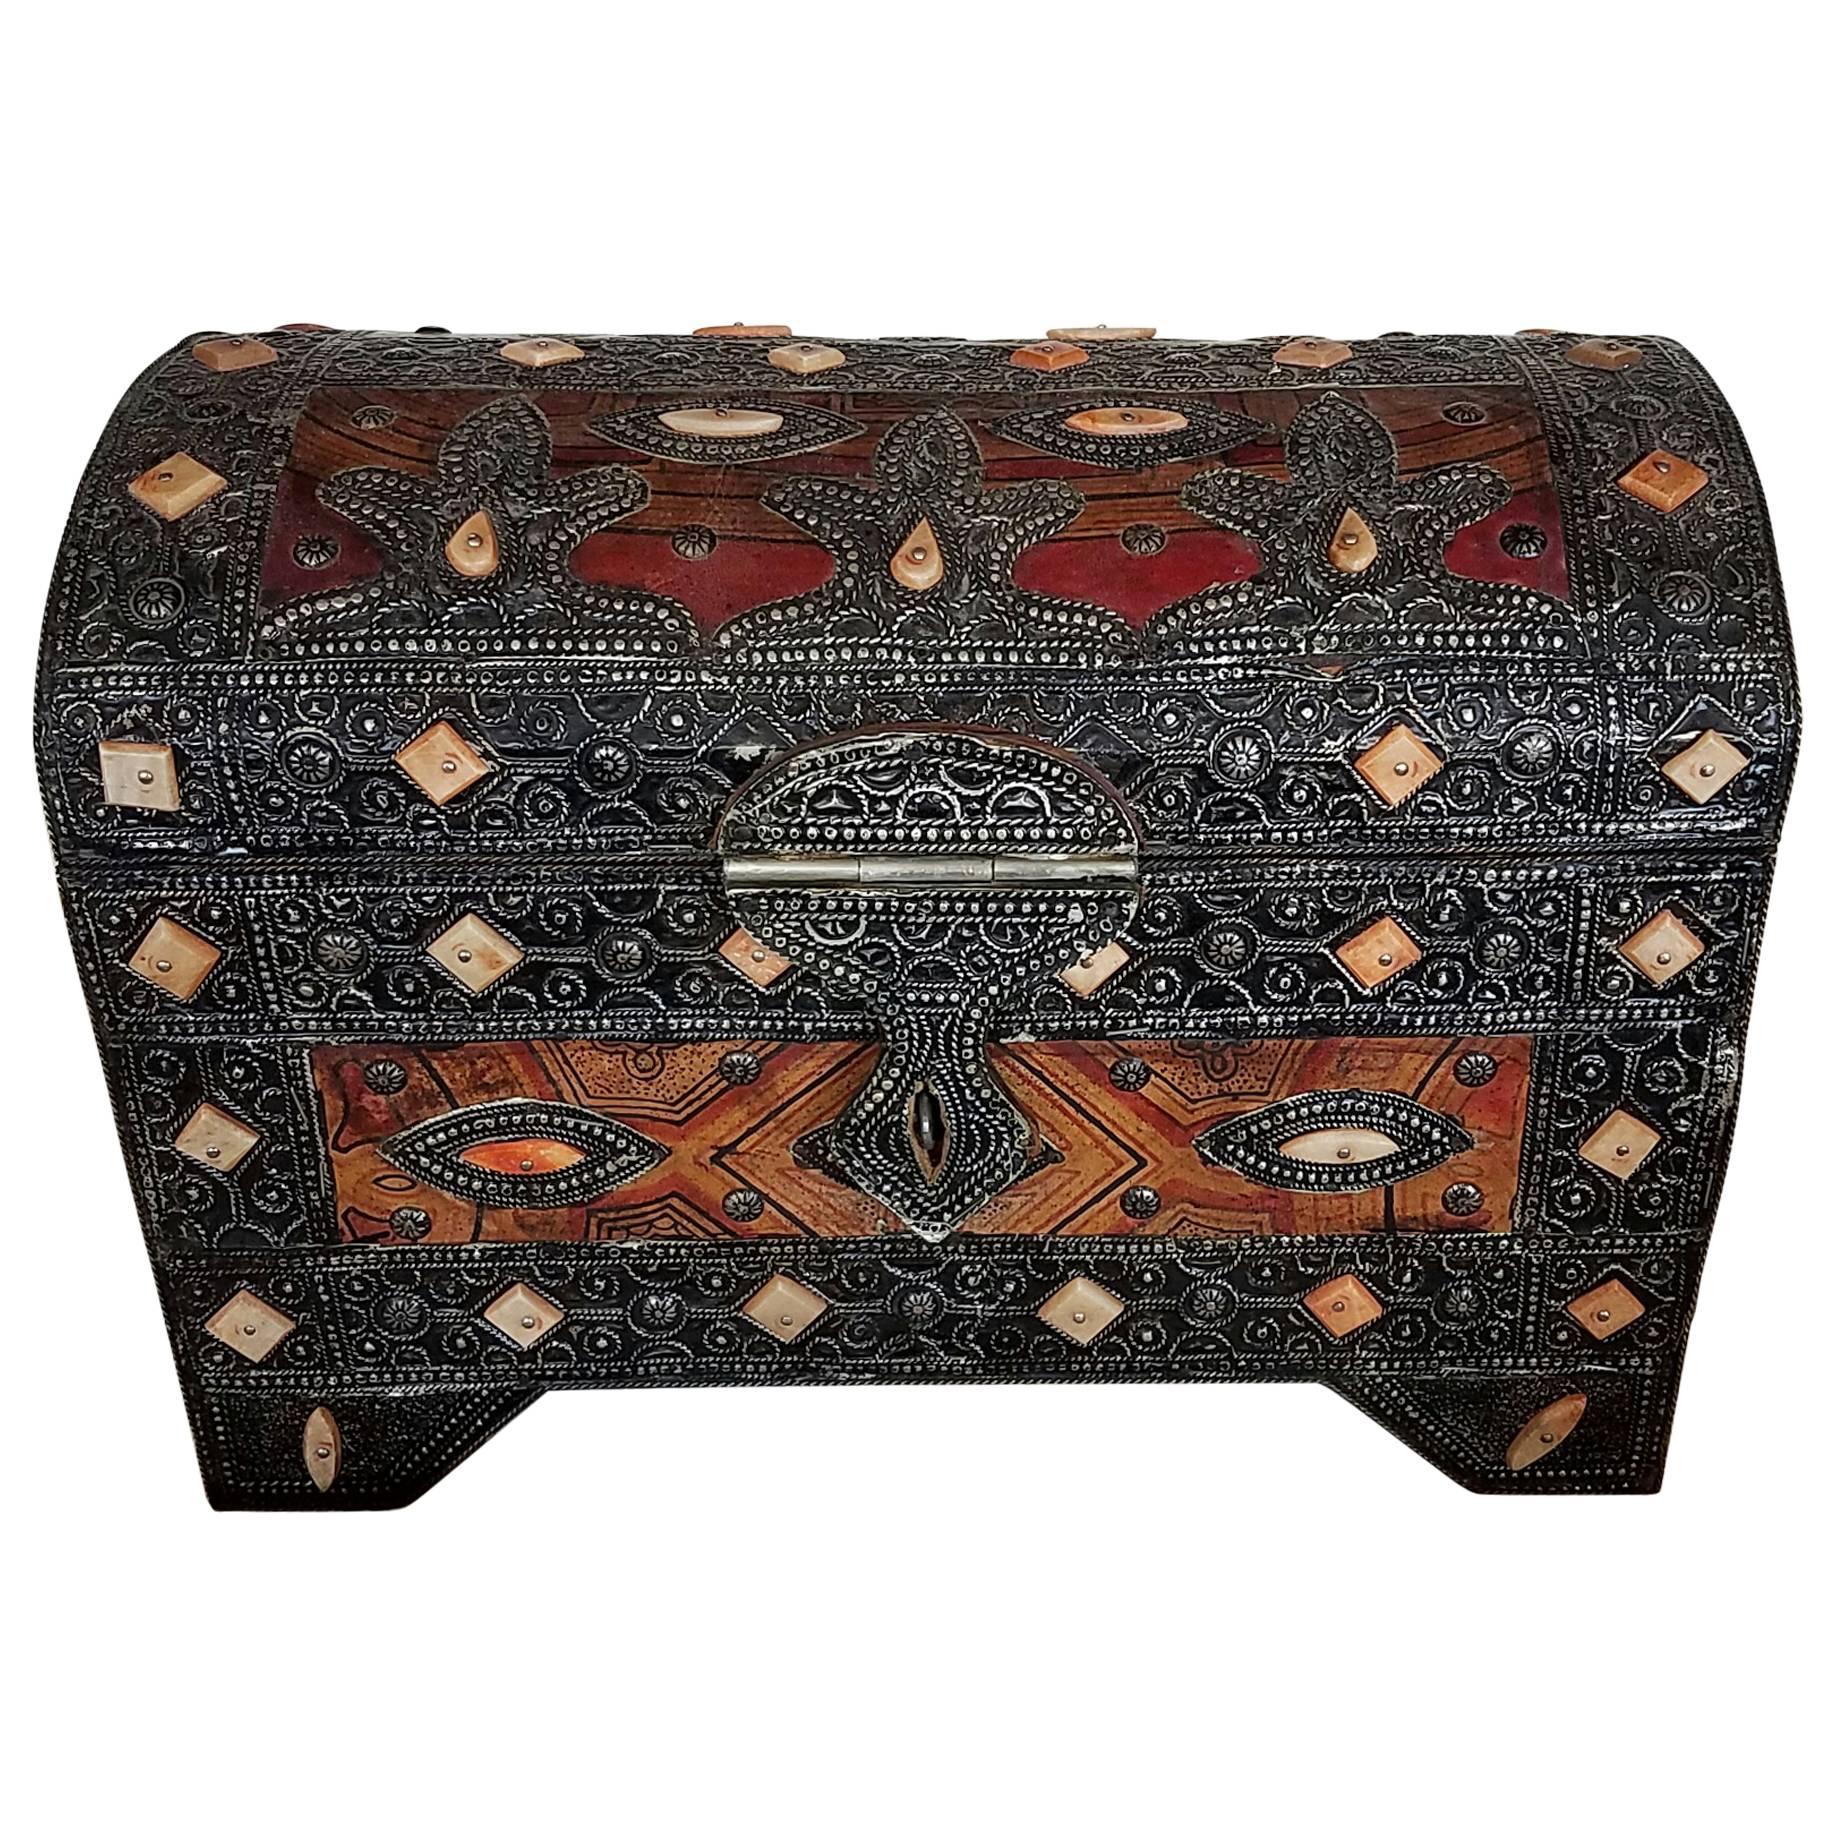 Camel Bone / Metal Inlaid Moroccan Wooden Trunk For Sale